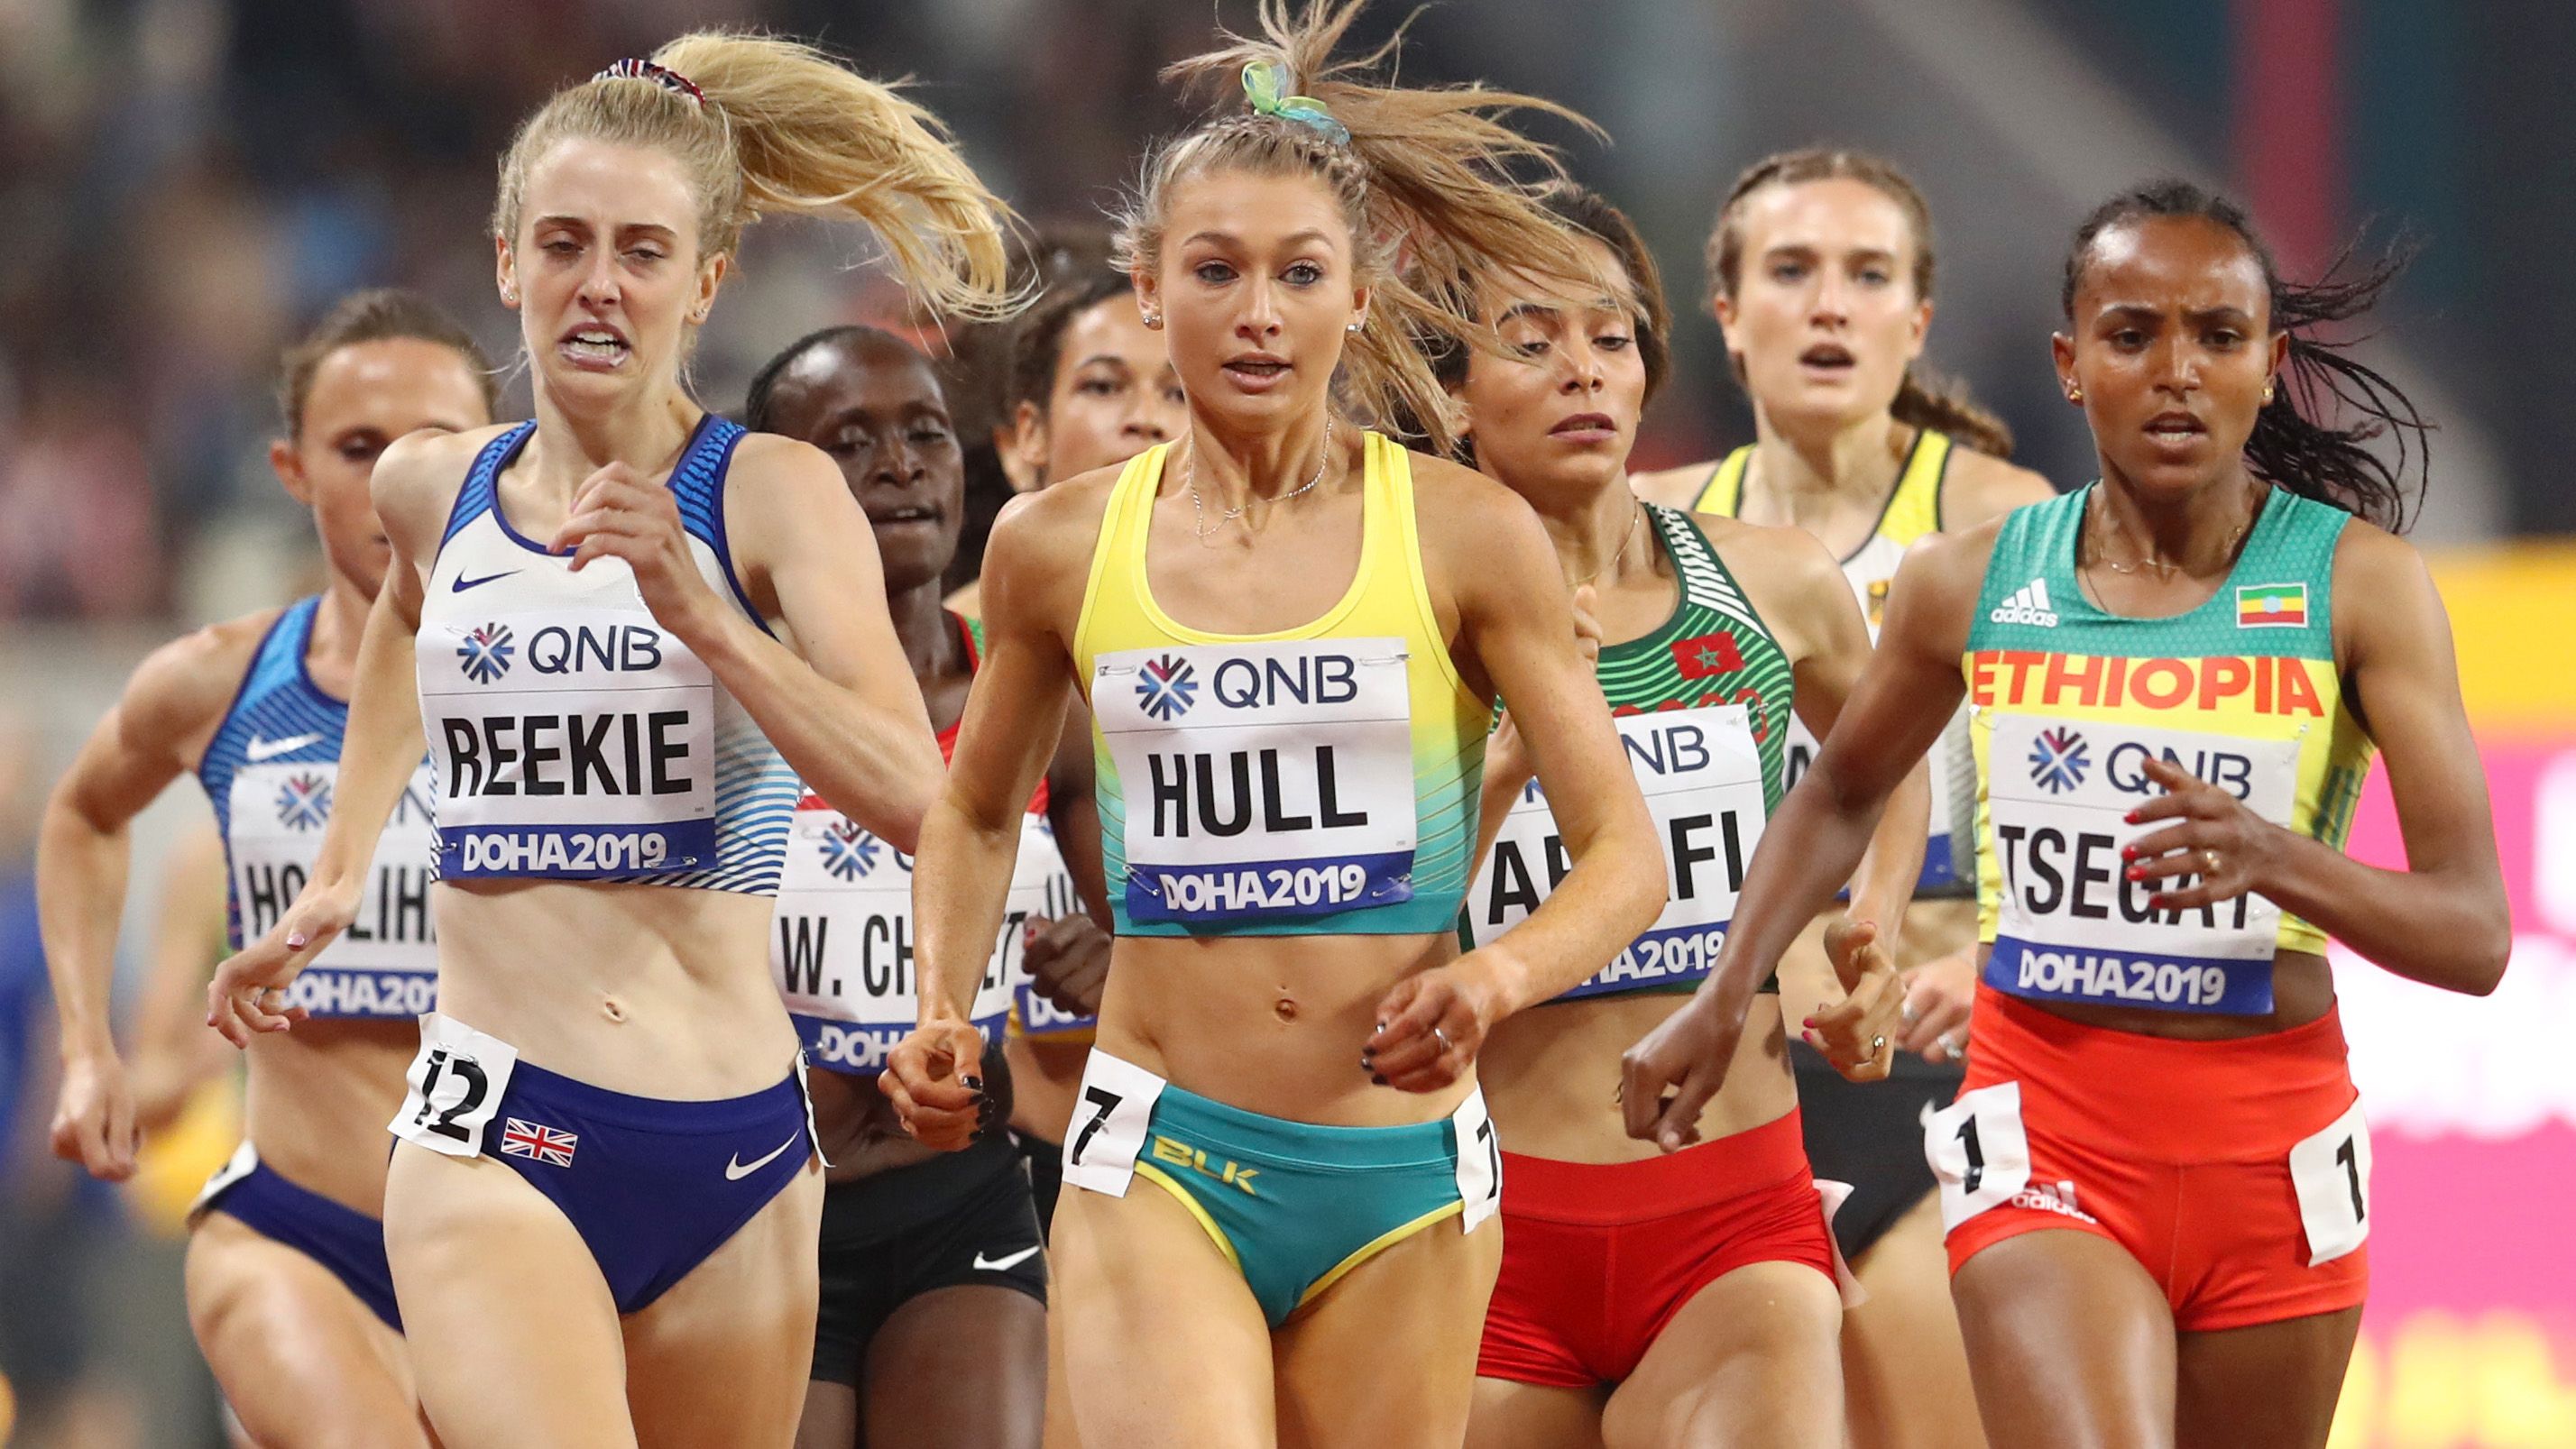 Jessica Hull in action at the World Athletics Championships in Doha in 2019